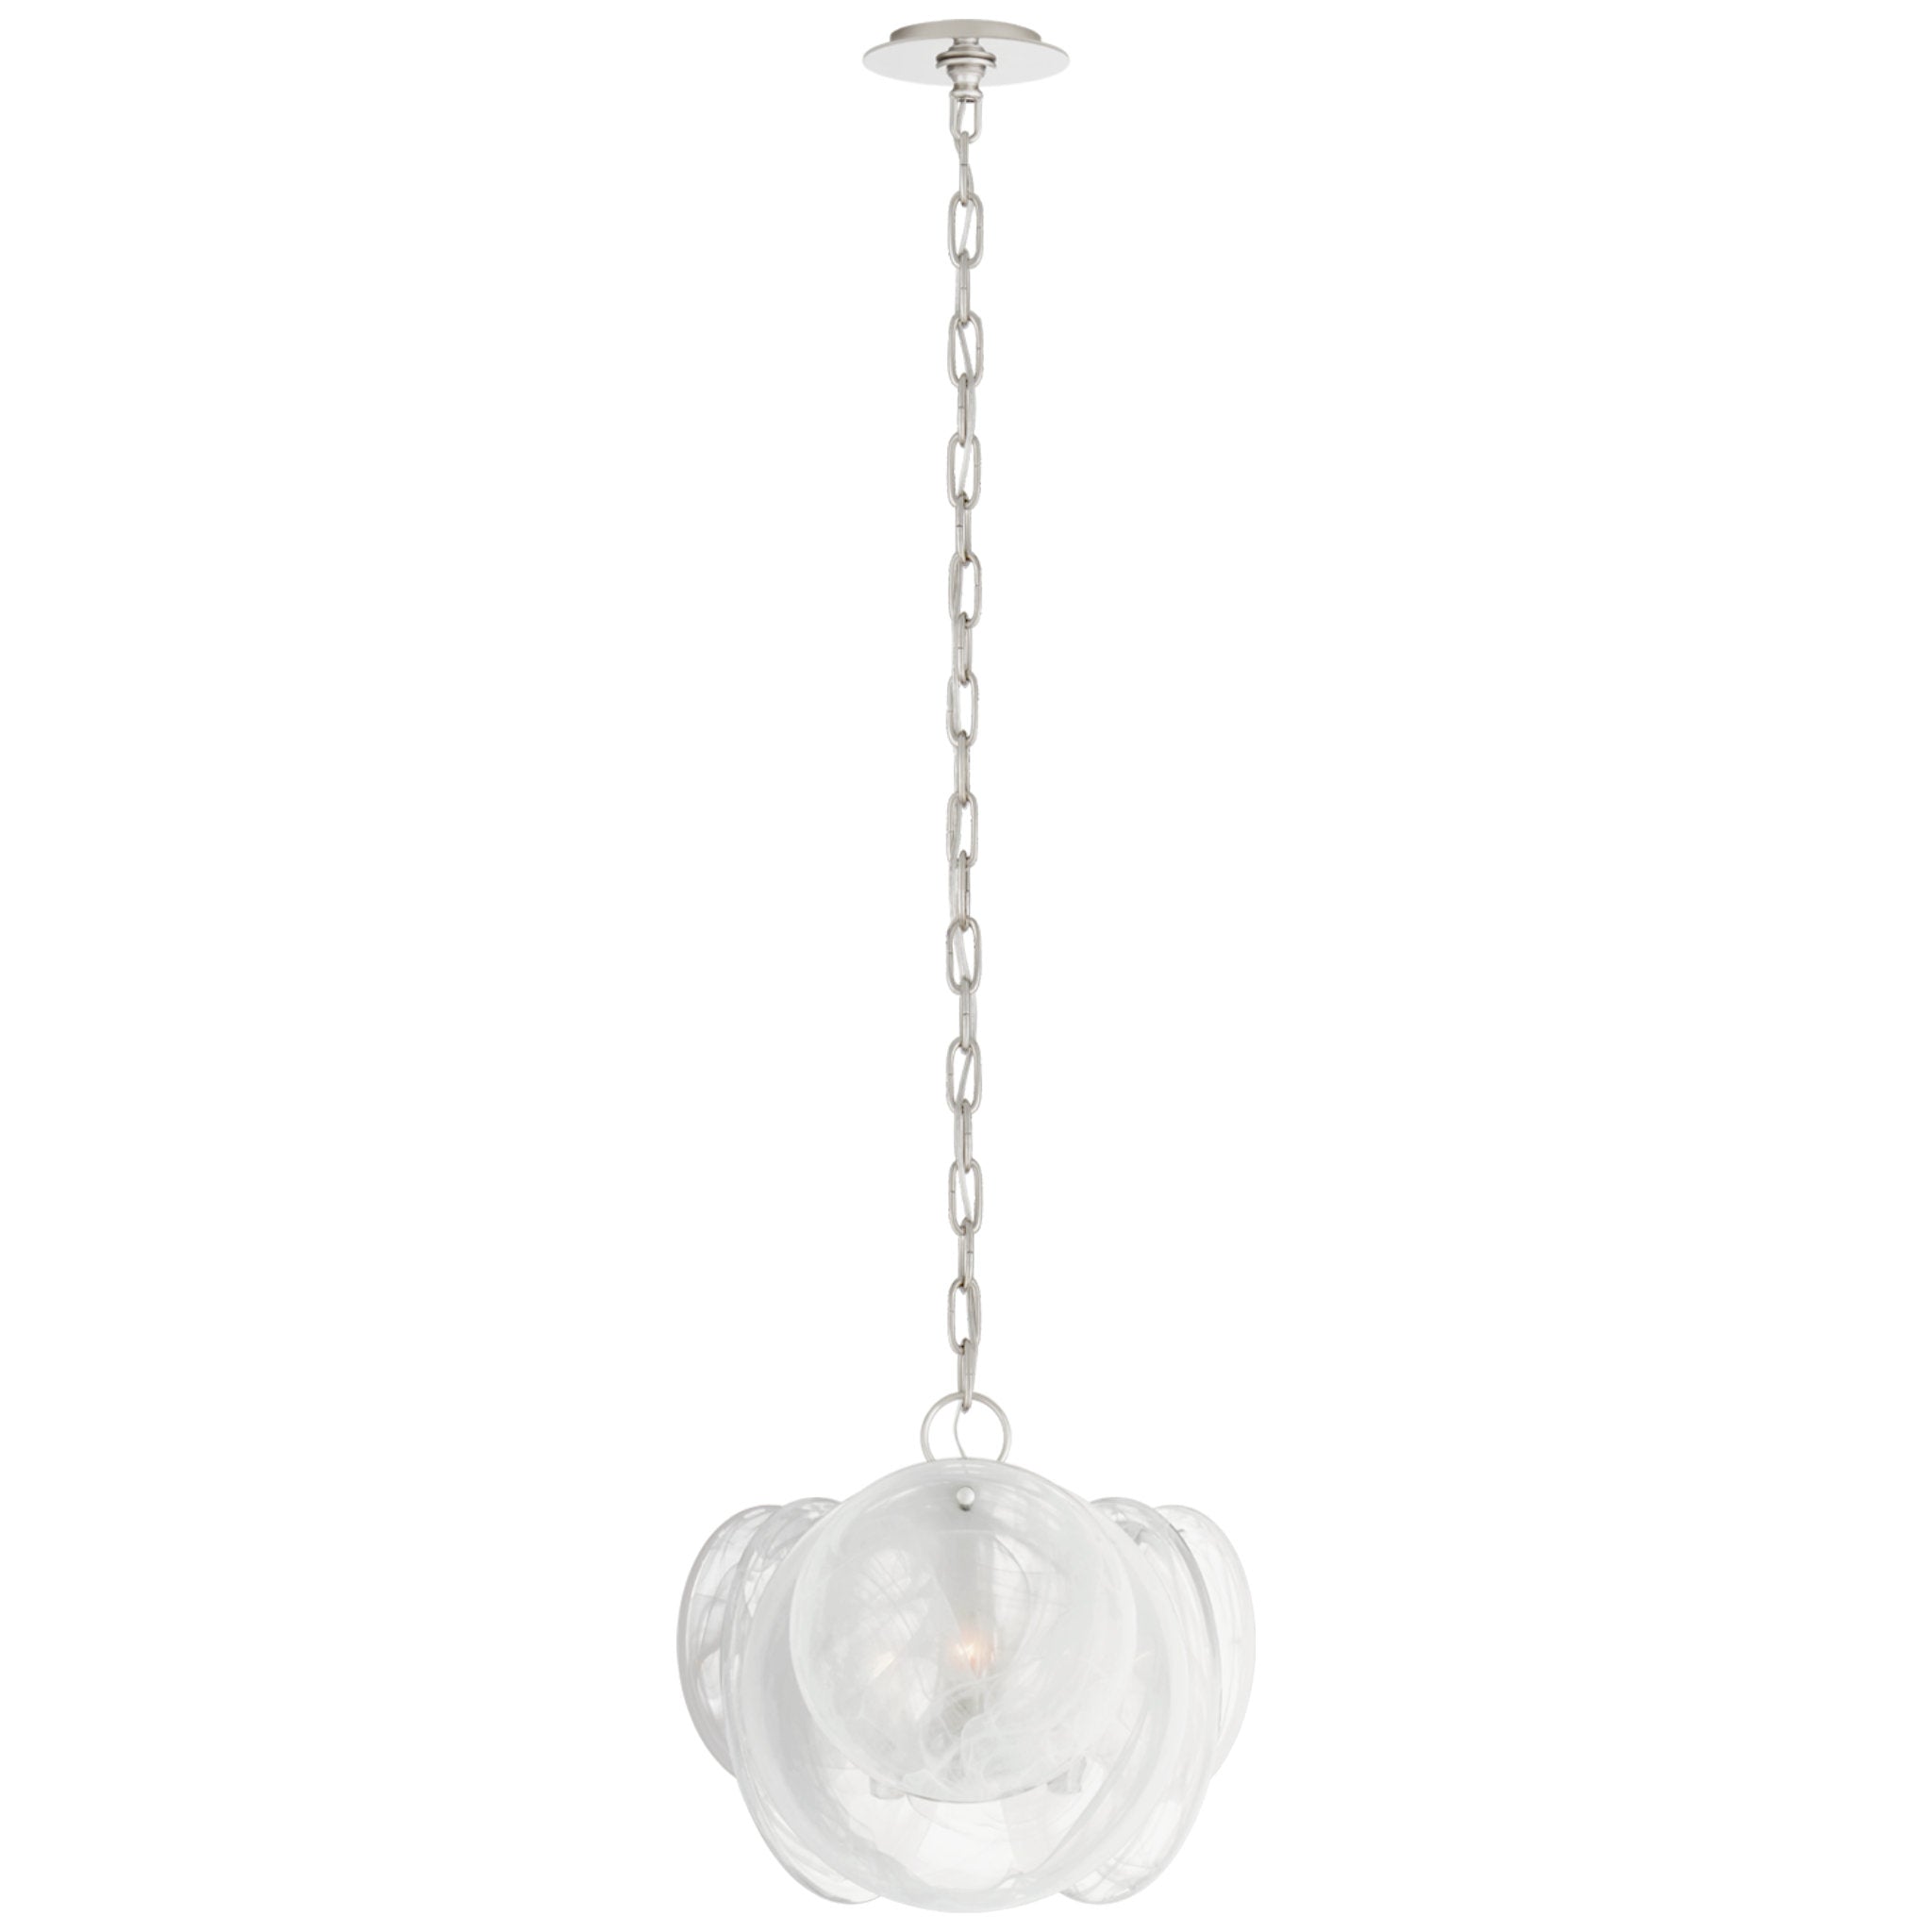 AERIN Loire Petite Chandelier in Polished Nickel with White Strie Glass